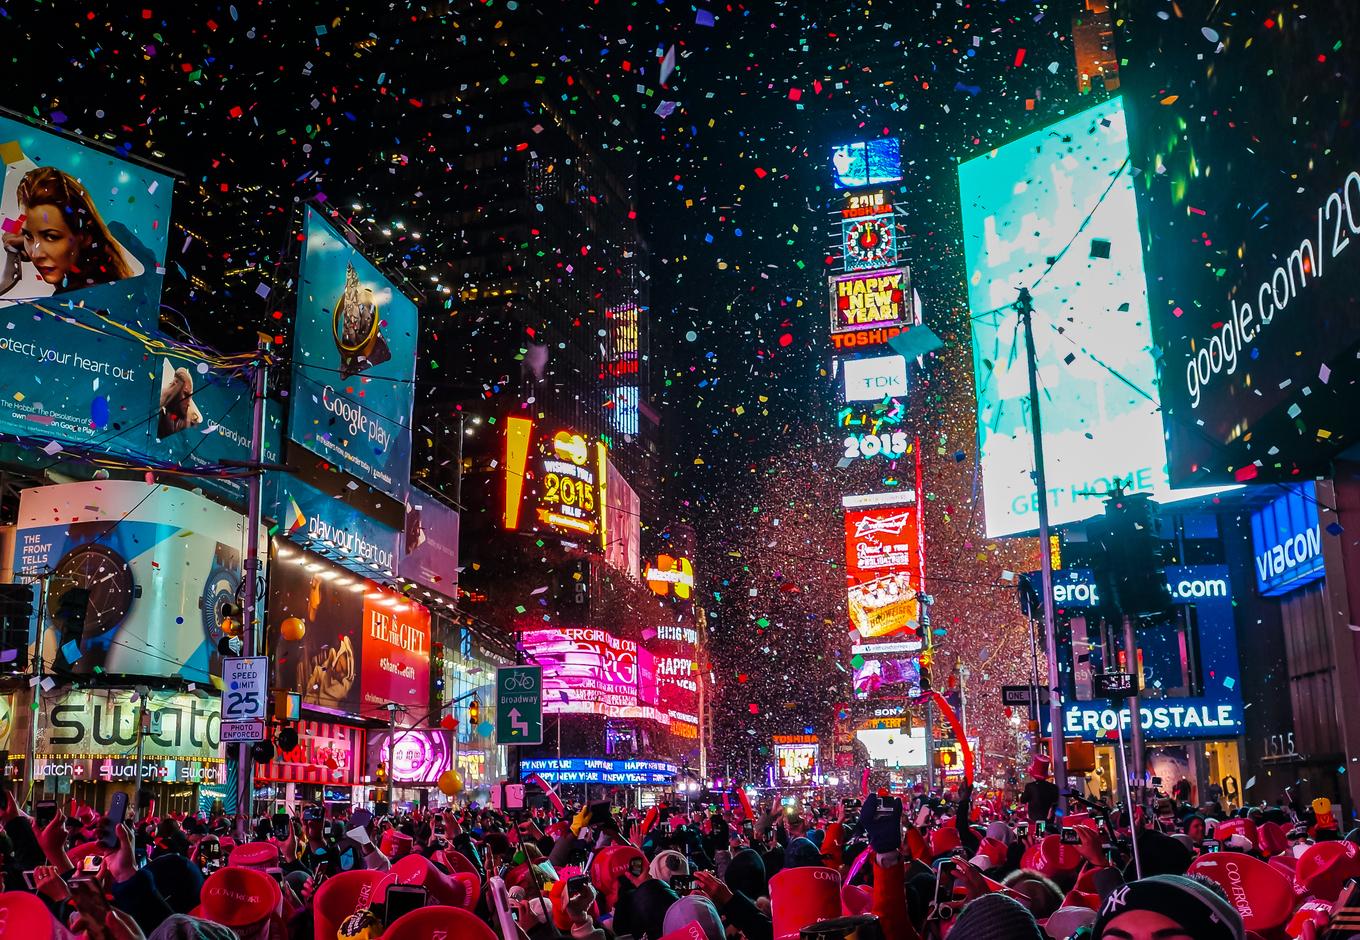 New Year's Eve celebration at the Times Square, in New York City.